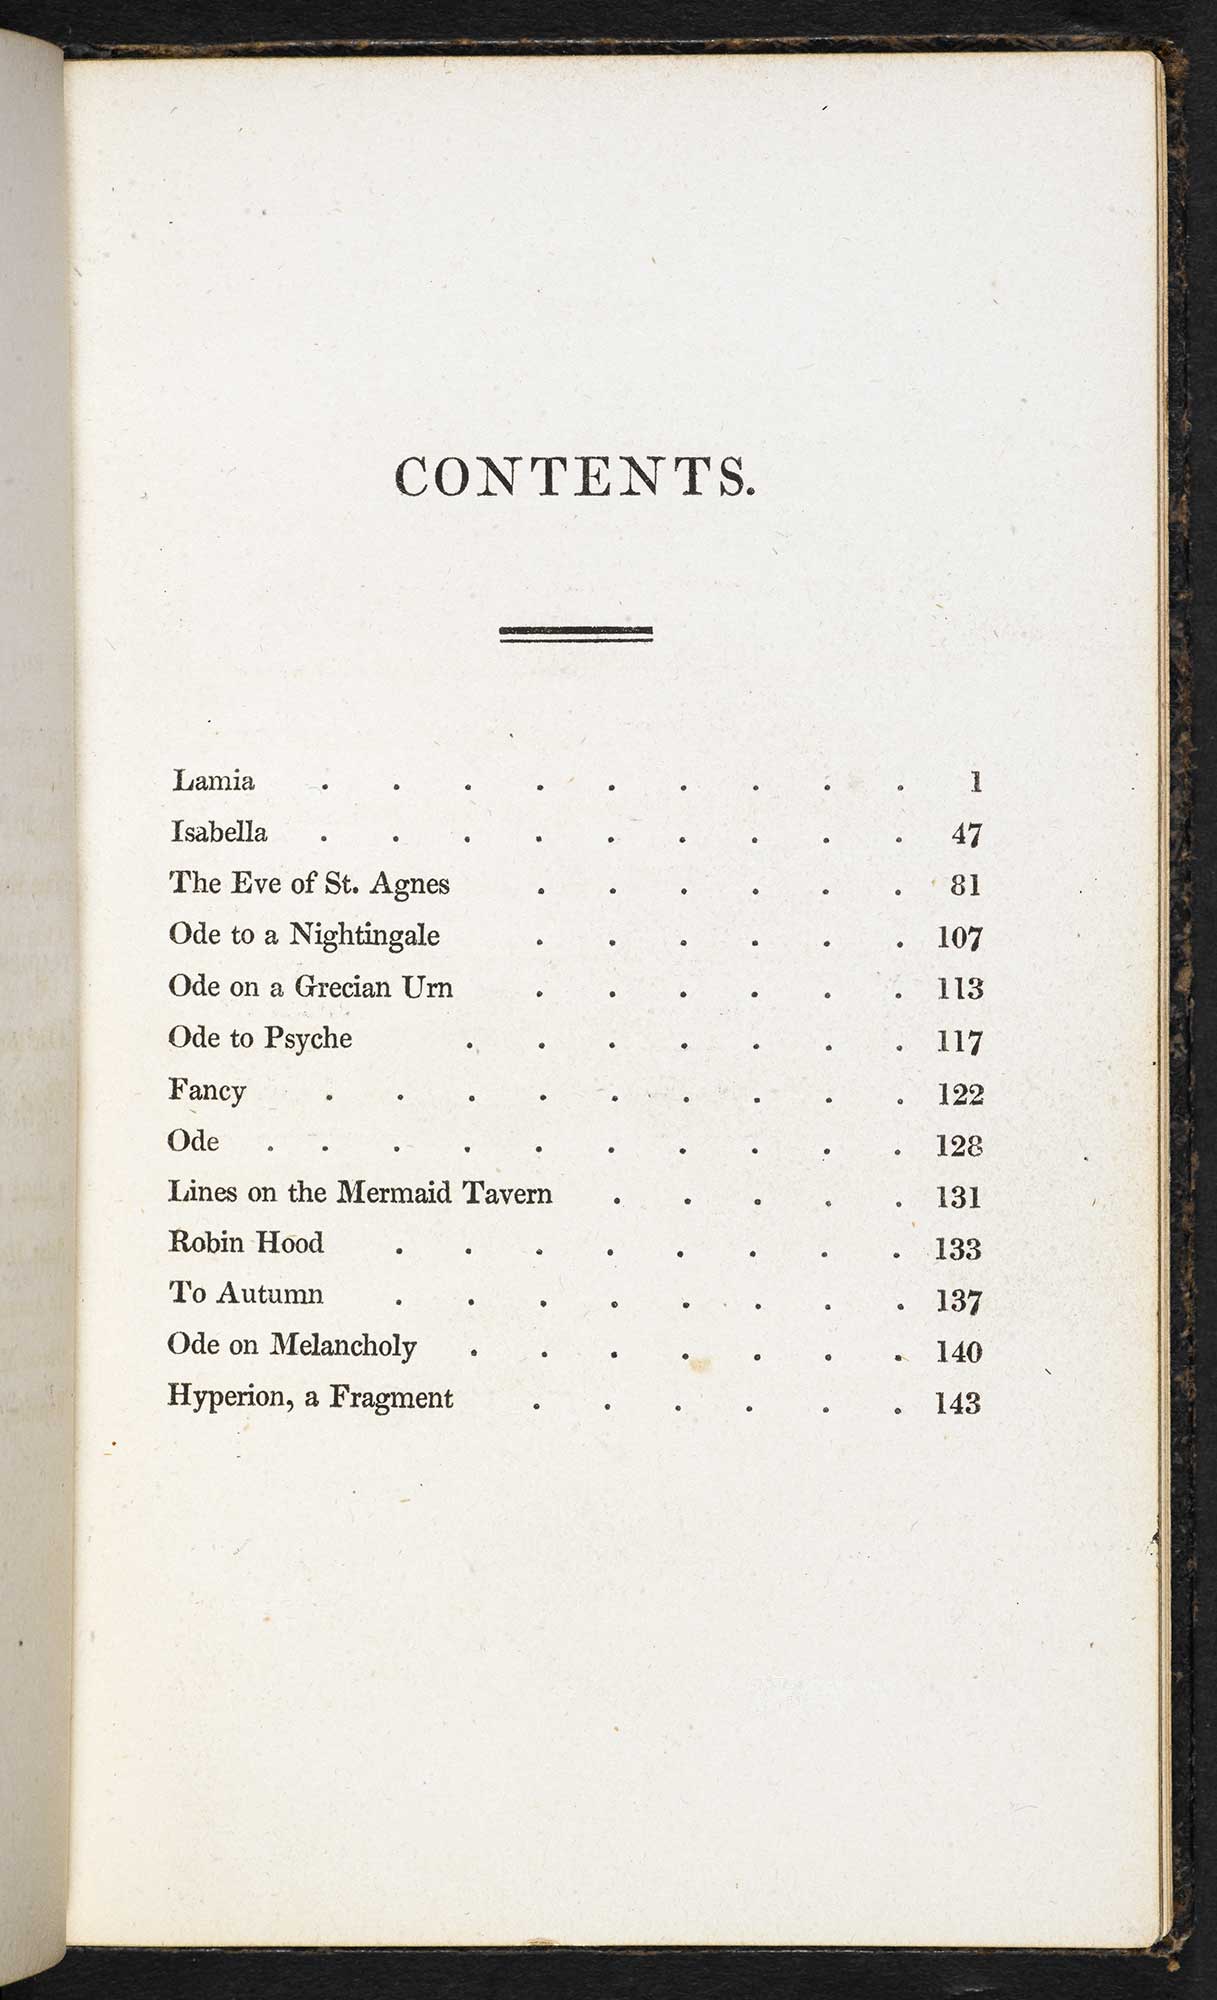 Contents page for Keats’s 1820 collection. Click to enlarge.